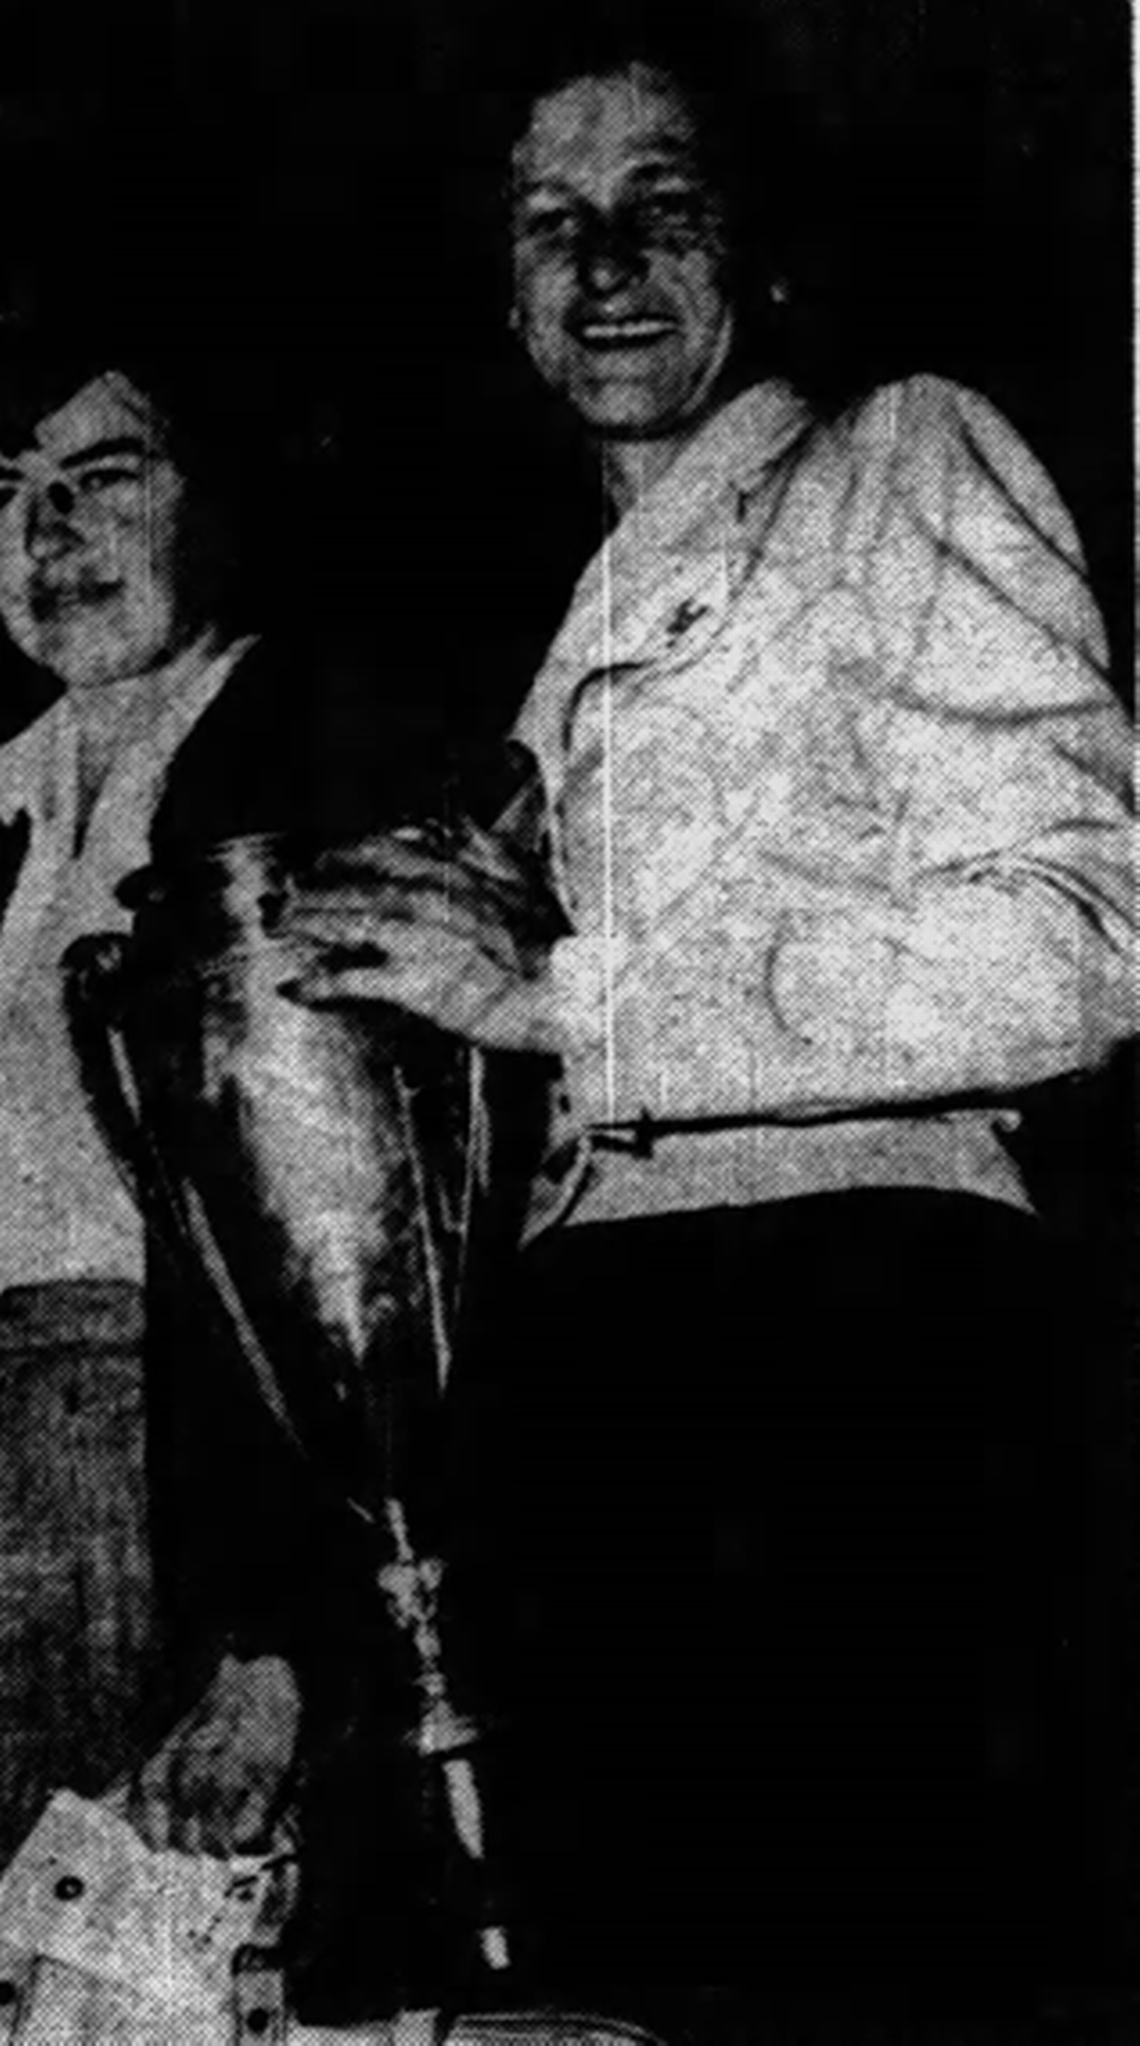 Babe Zaharias poses with the 1950 U.S. Open championship trophy at Rolling Hills Country Club. Zaharias was one of the 13 founding members who helped create the LPGA in Wichita during the tournament.